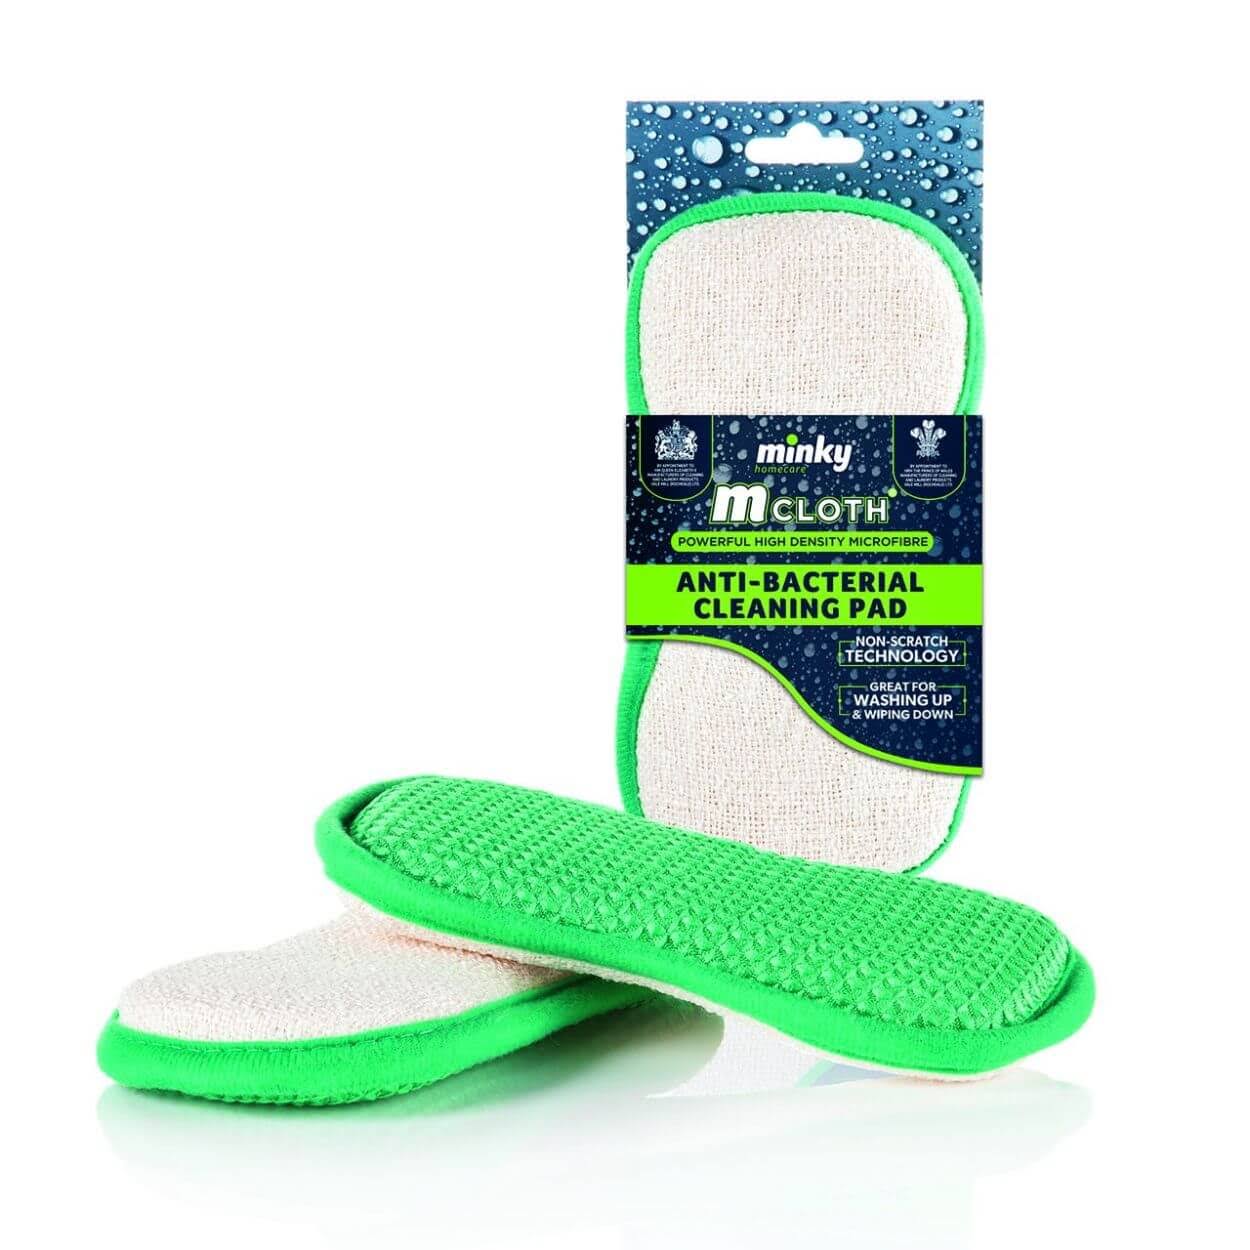 Minky M Cloth Anti - Bacterial Cleaning Pad